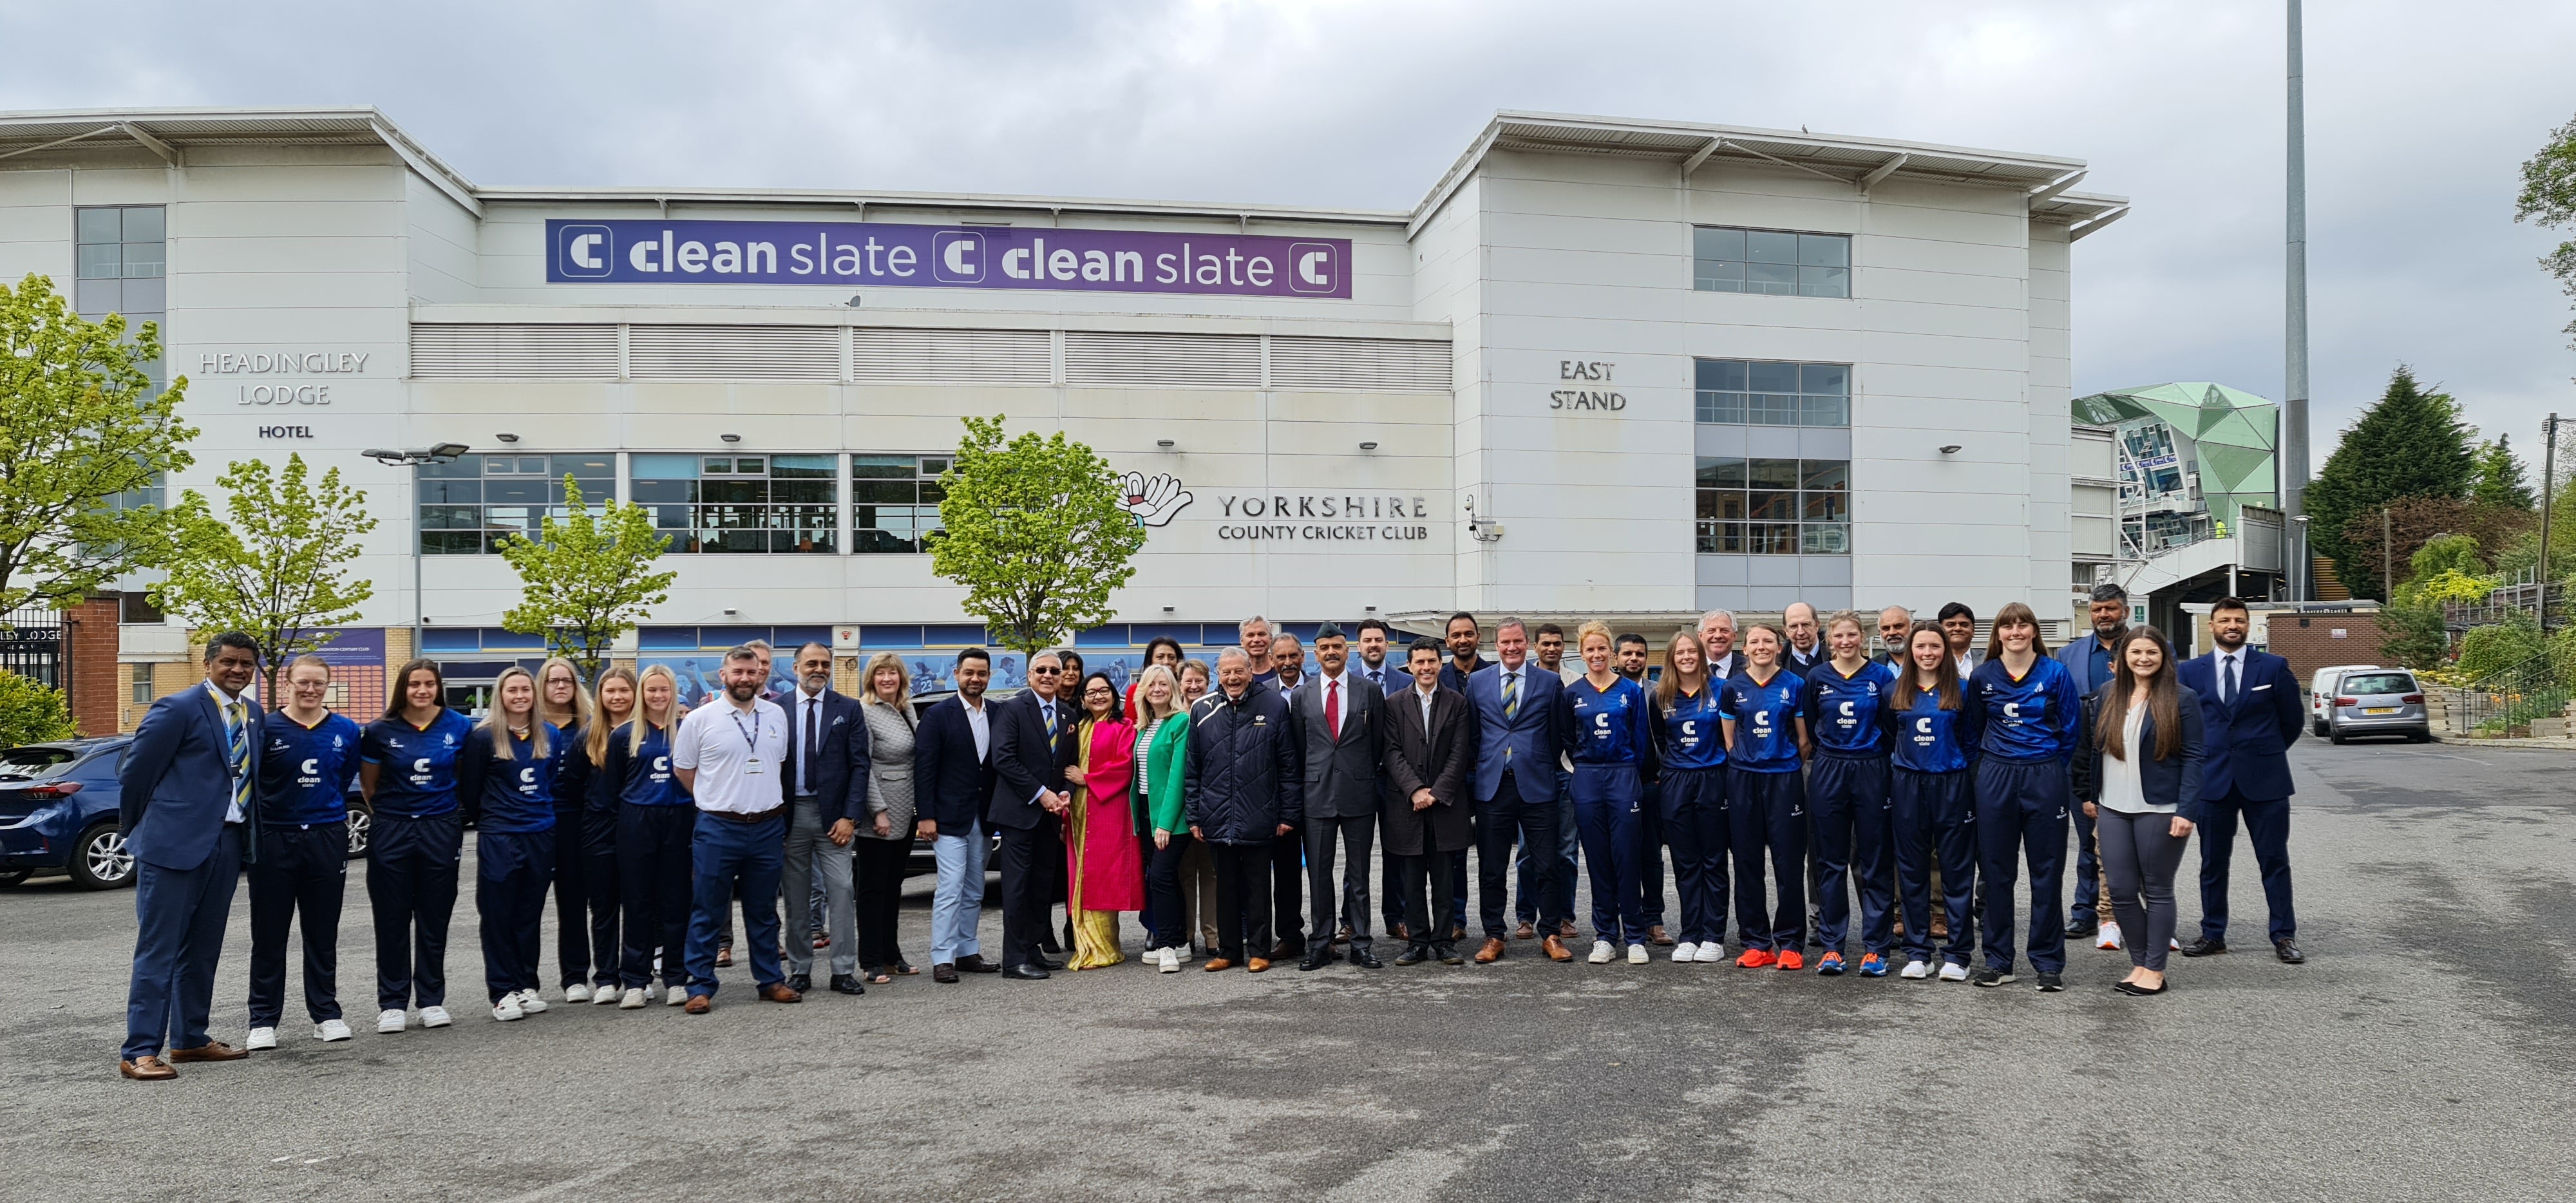 Branding of Indian firm Clean Slate Studioz was unveiled at Headingley (Handout)